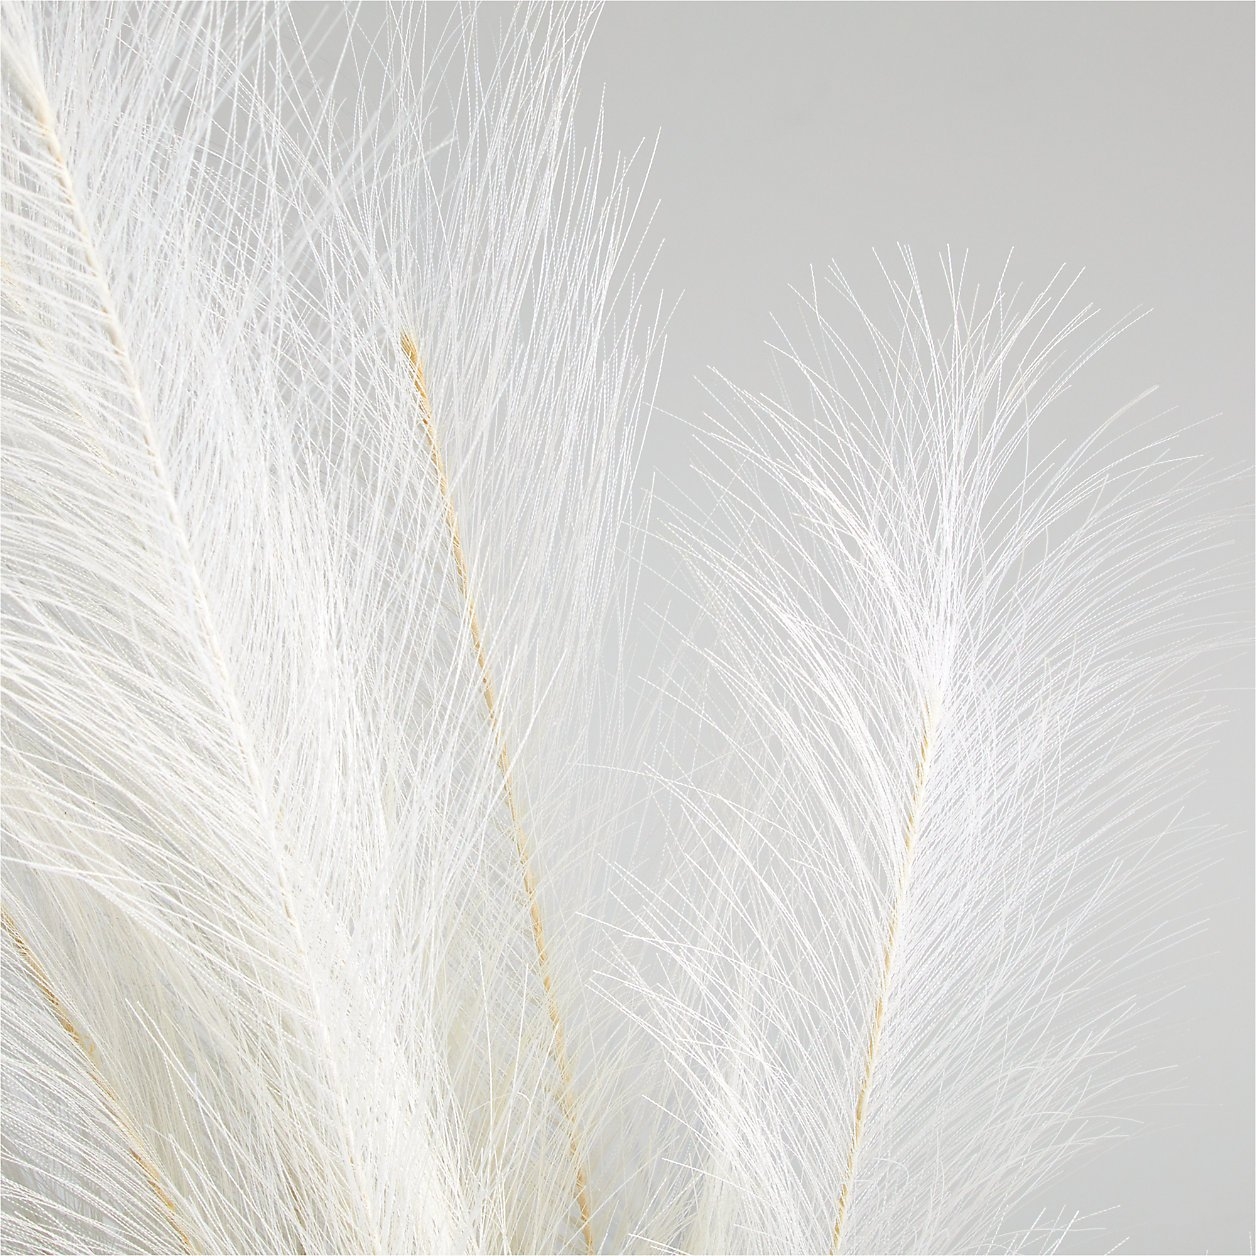 Faux Ivory Pampas Grass Bunch 45" - Image 2